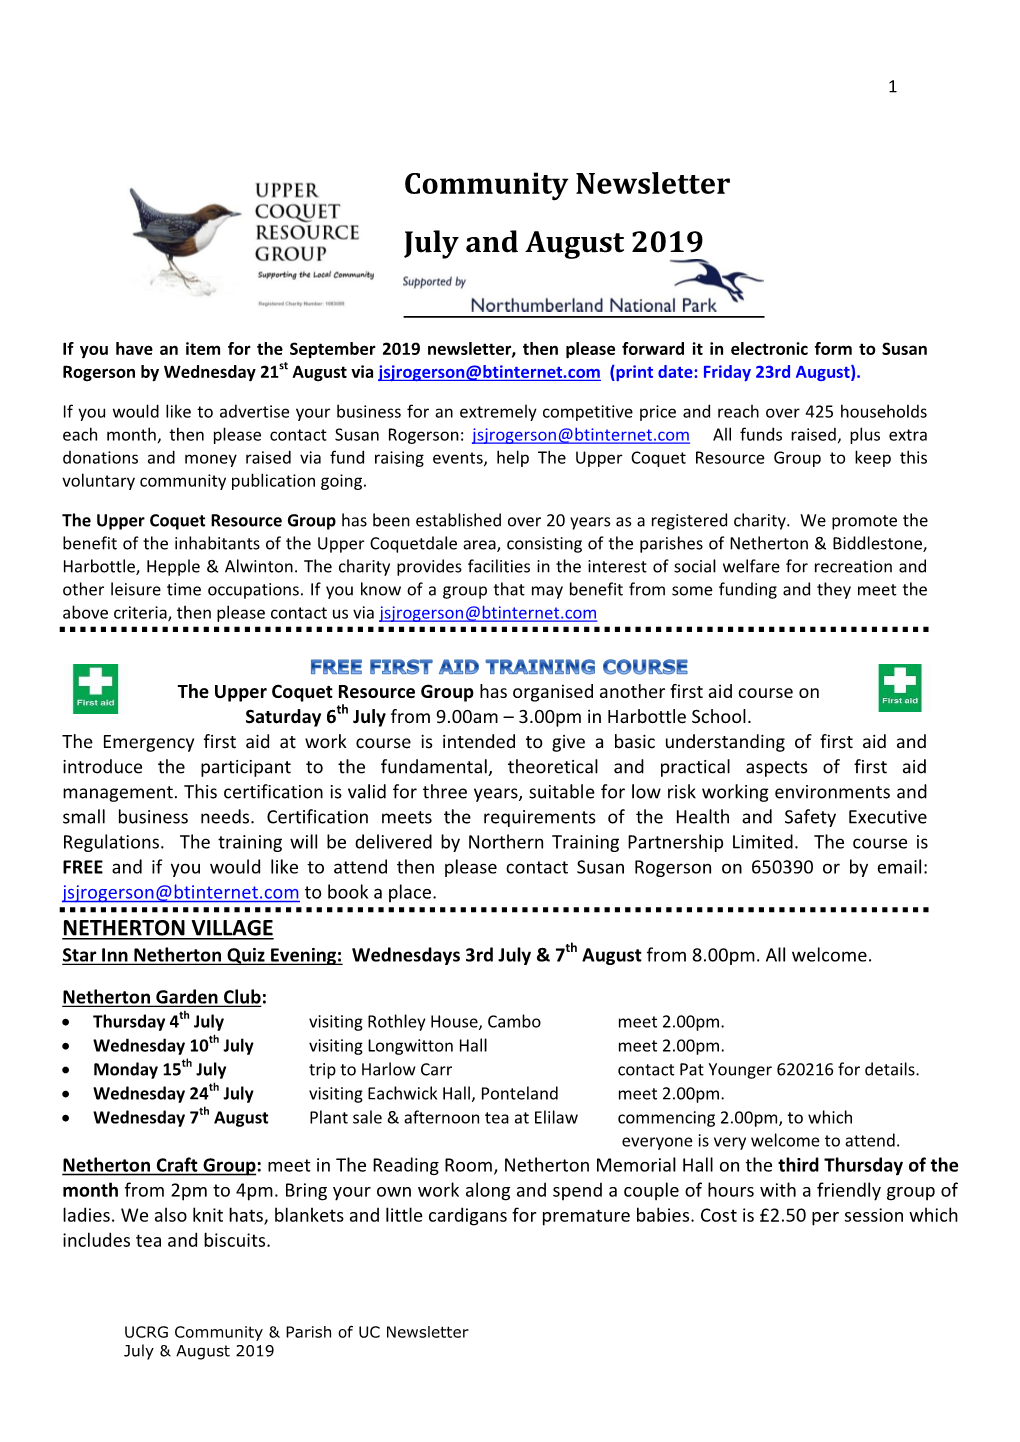 Community Newsletter July and August 2019